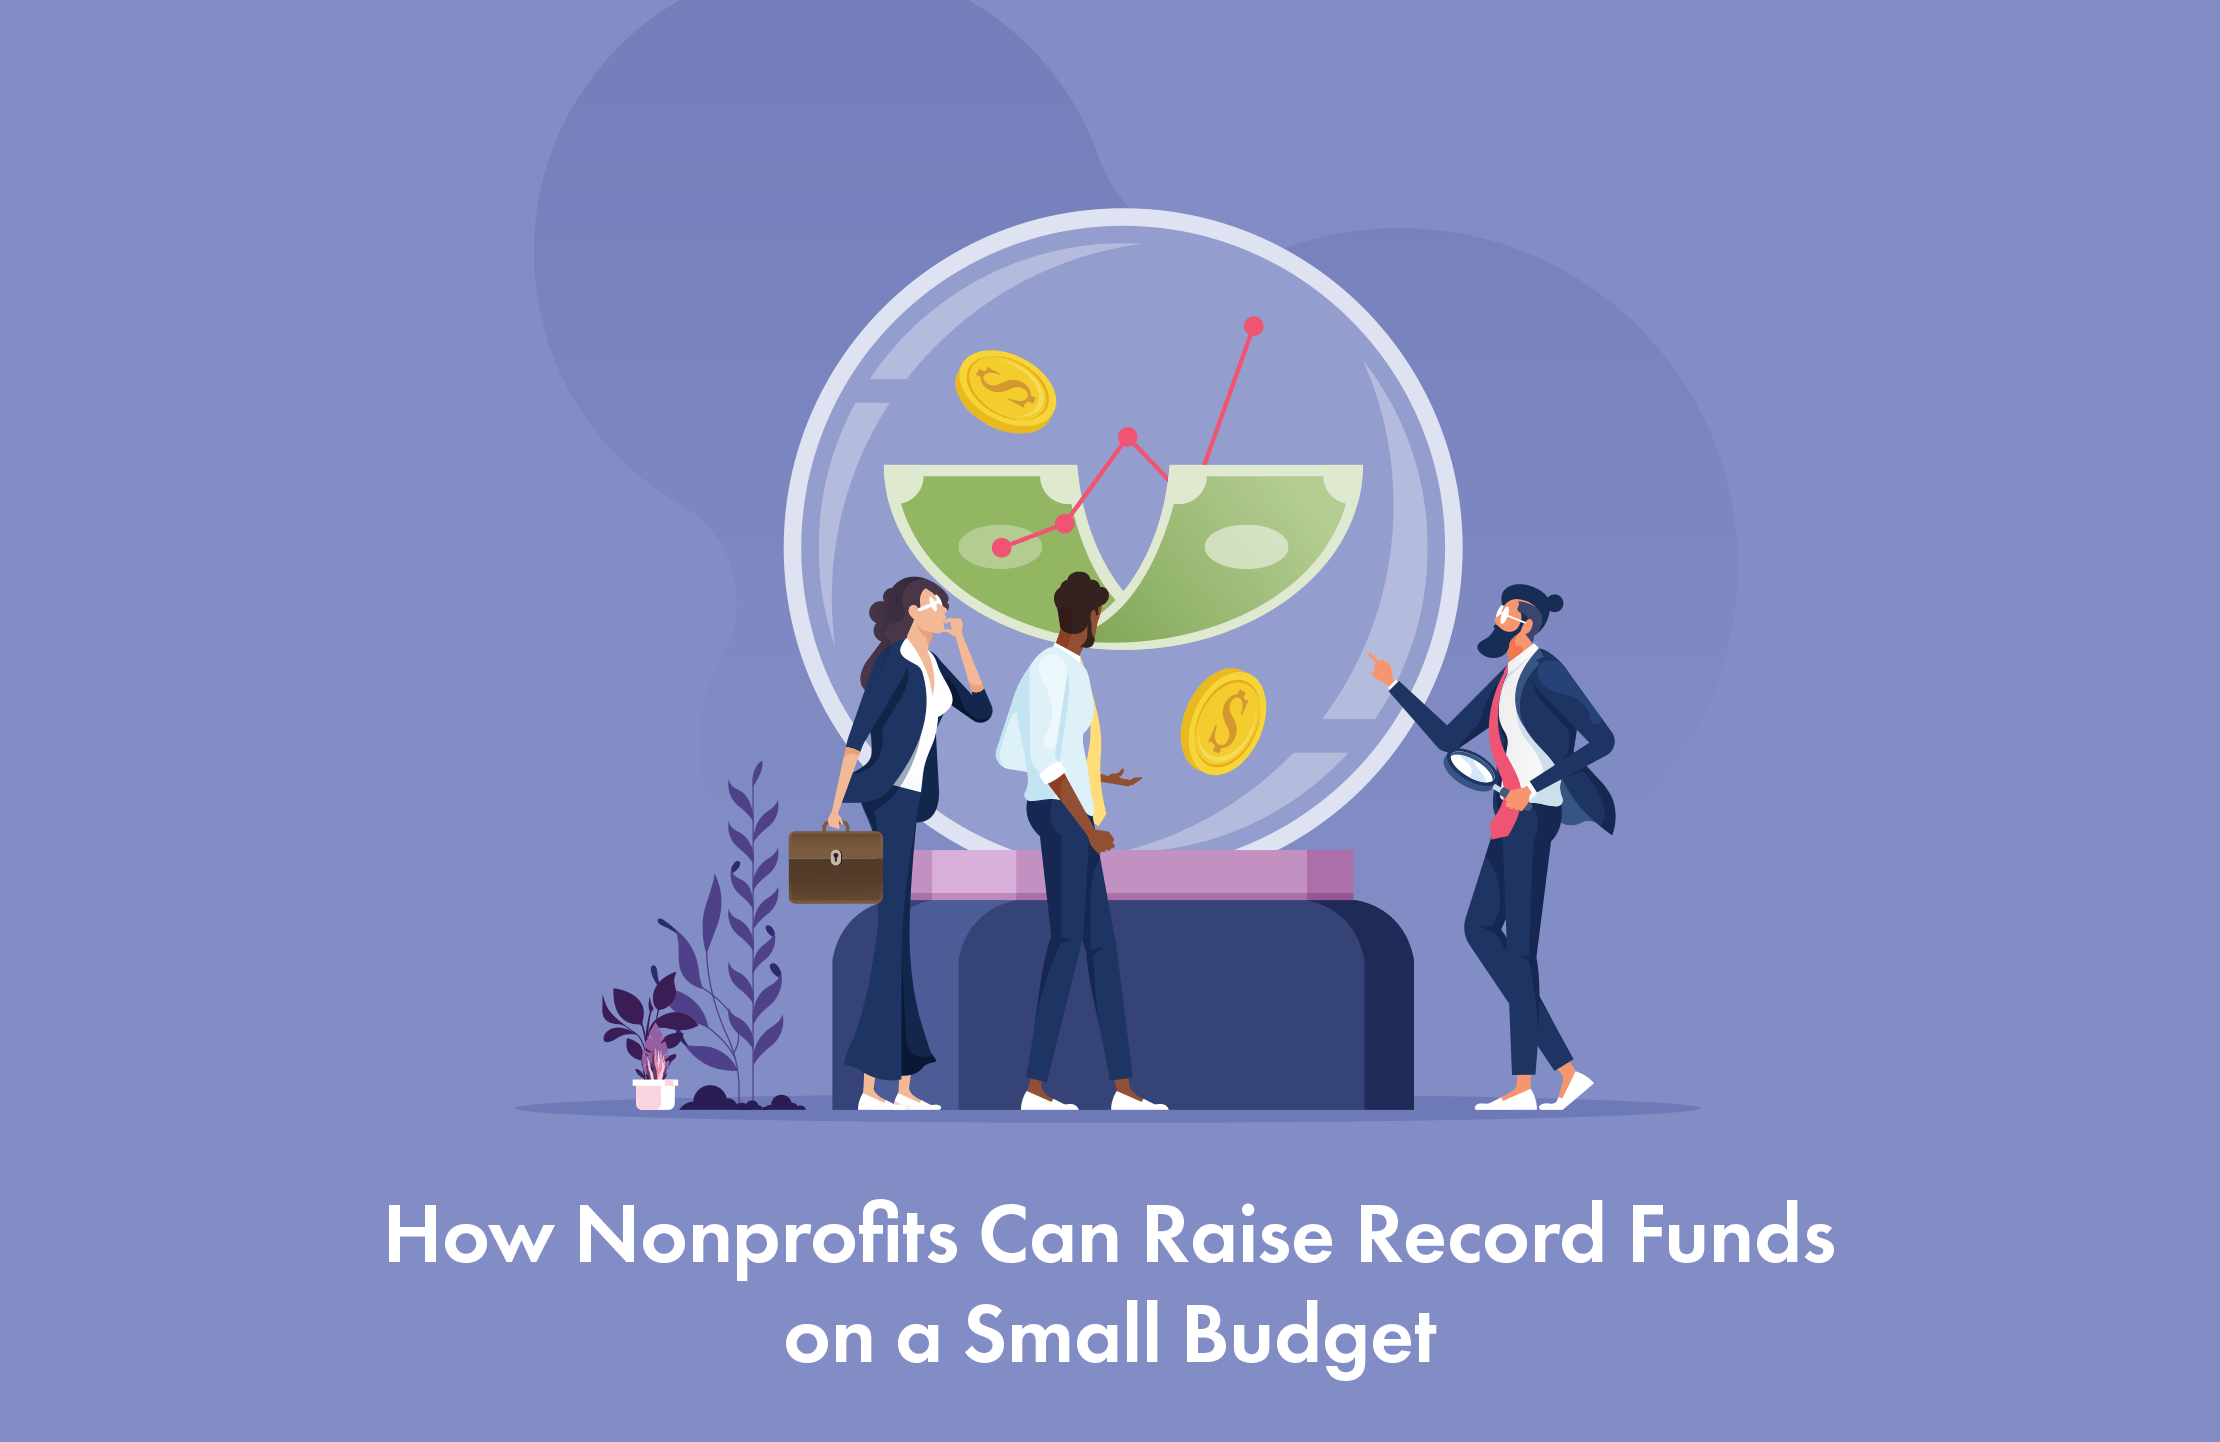 How Nonprofits Can Raise Record Funds on a Small Budget